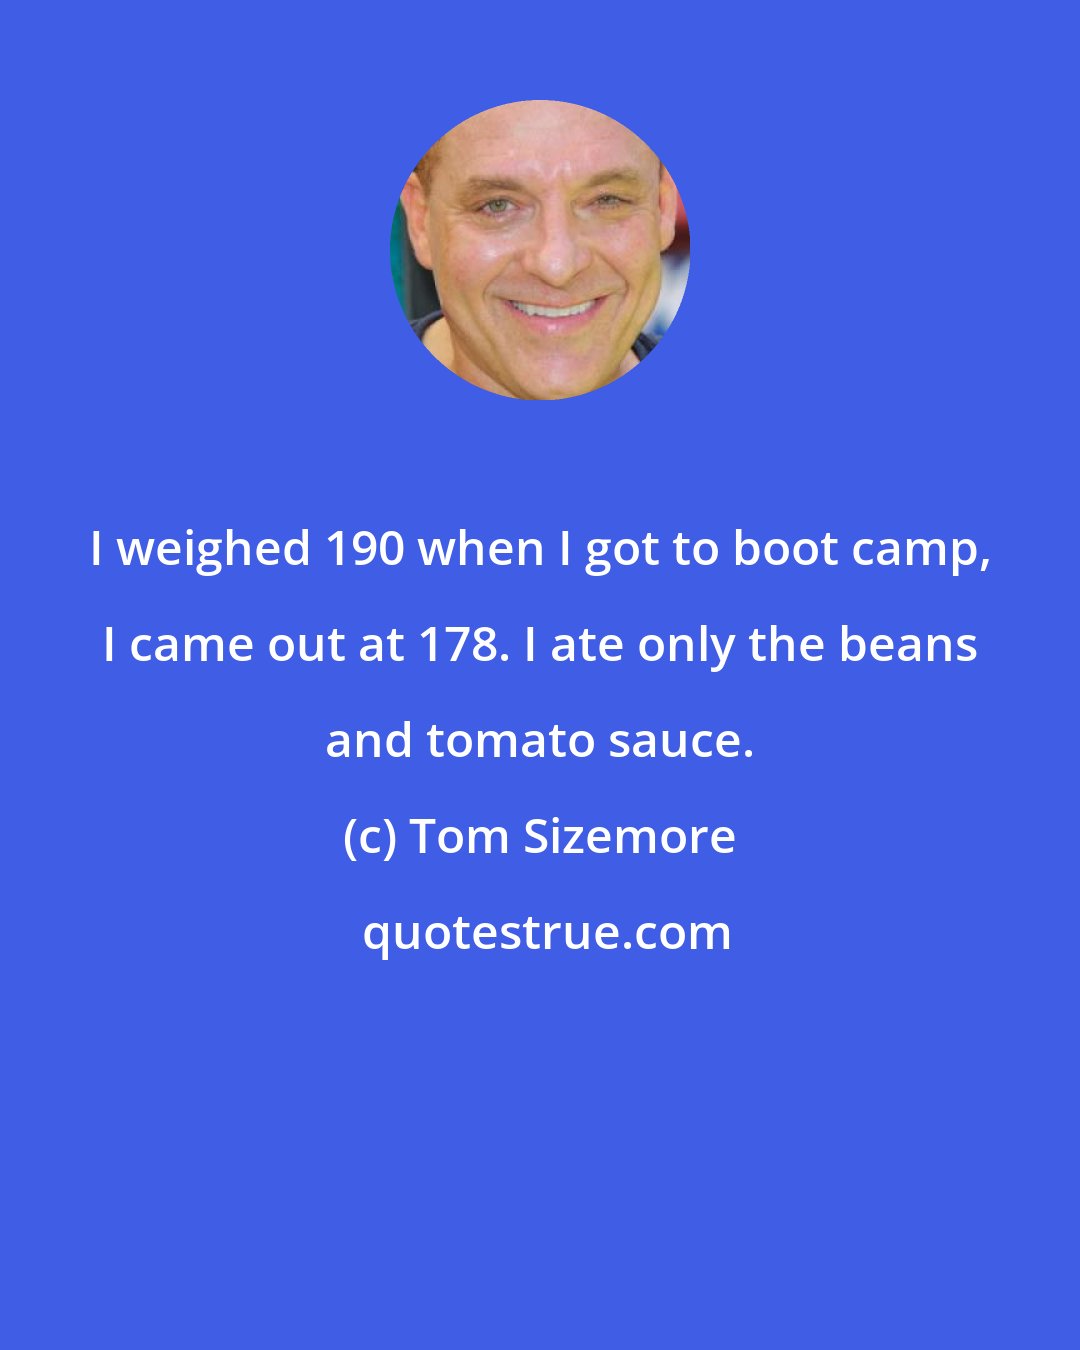 Tom Sizemore: I weighed 190 when I got to boot camp, I came out at 178. I ate only the beans and tomato sauce.